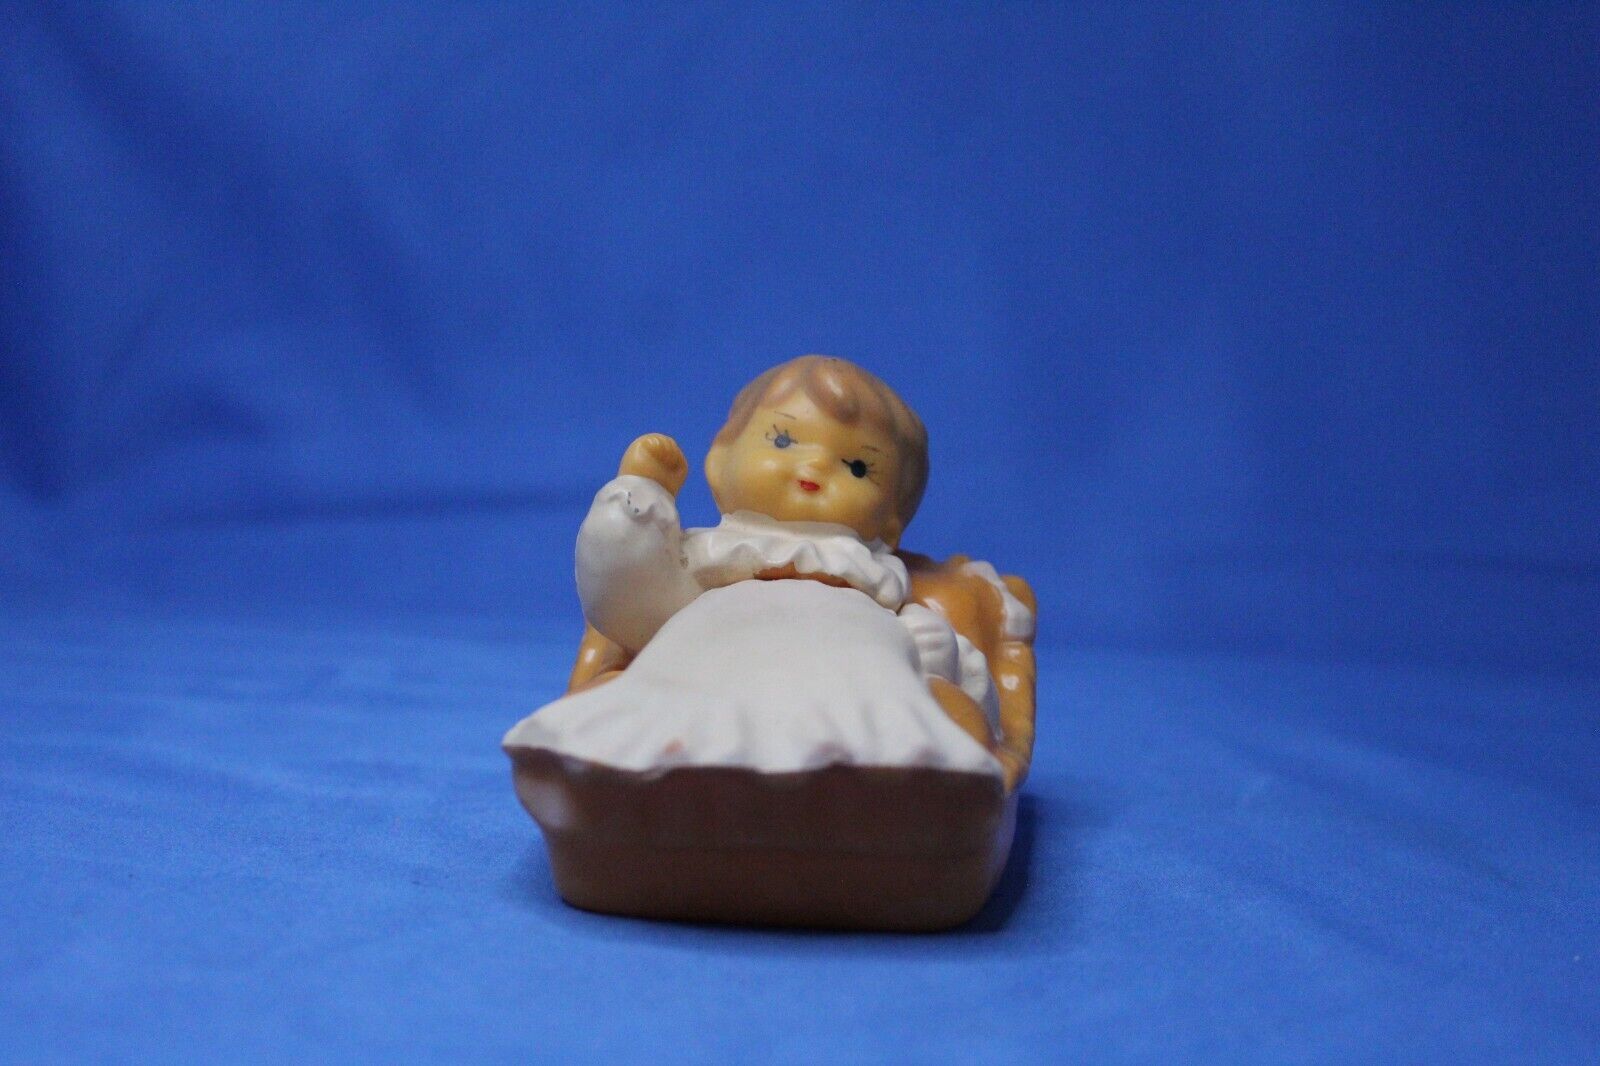 Antique Wilton 789 Cake Topper Baby in Peach Bassinet Baby Plastic Decoration - $4.55